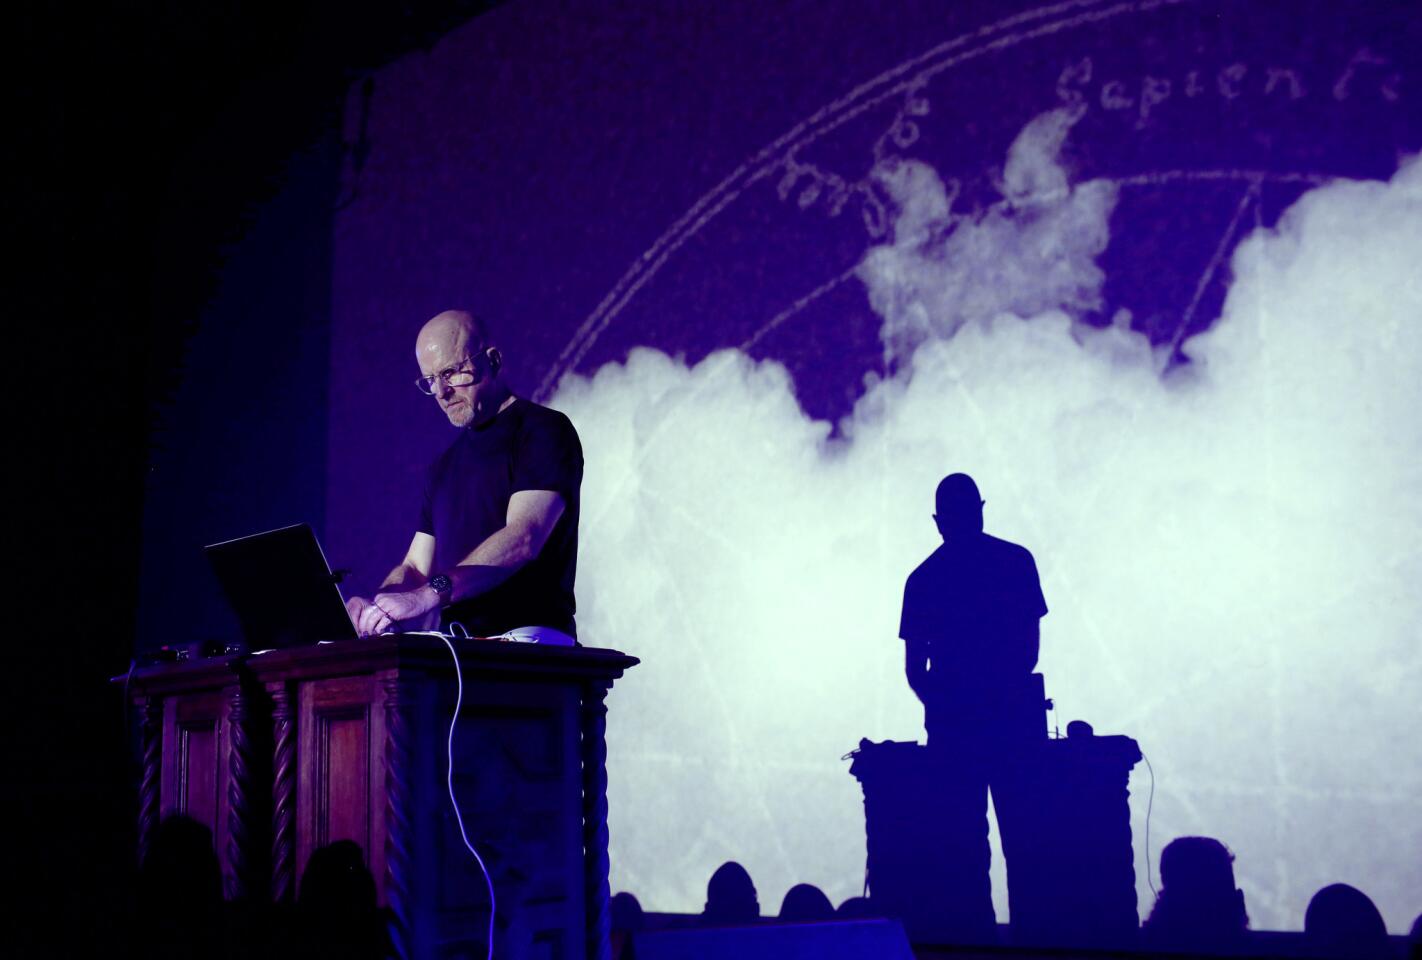 Ambient drone artist Lustmord performs at the Masonic Lodge.